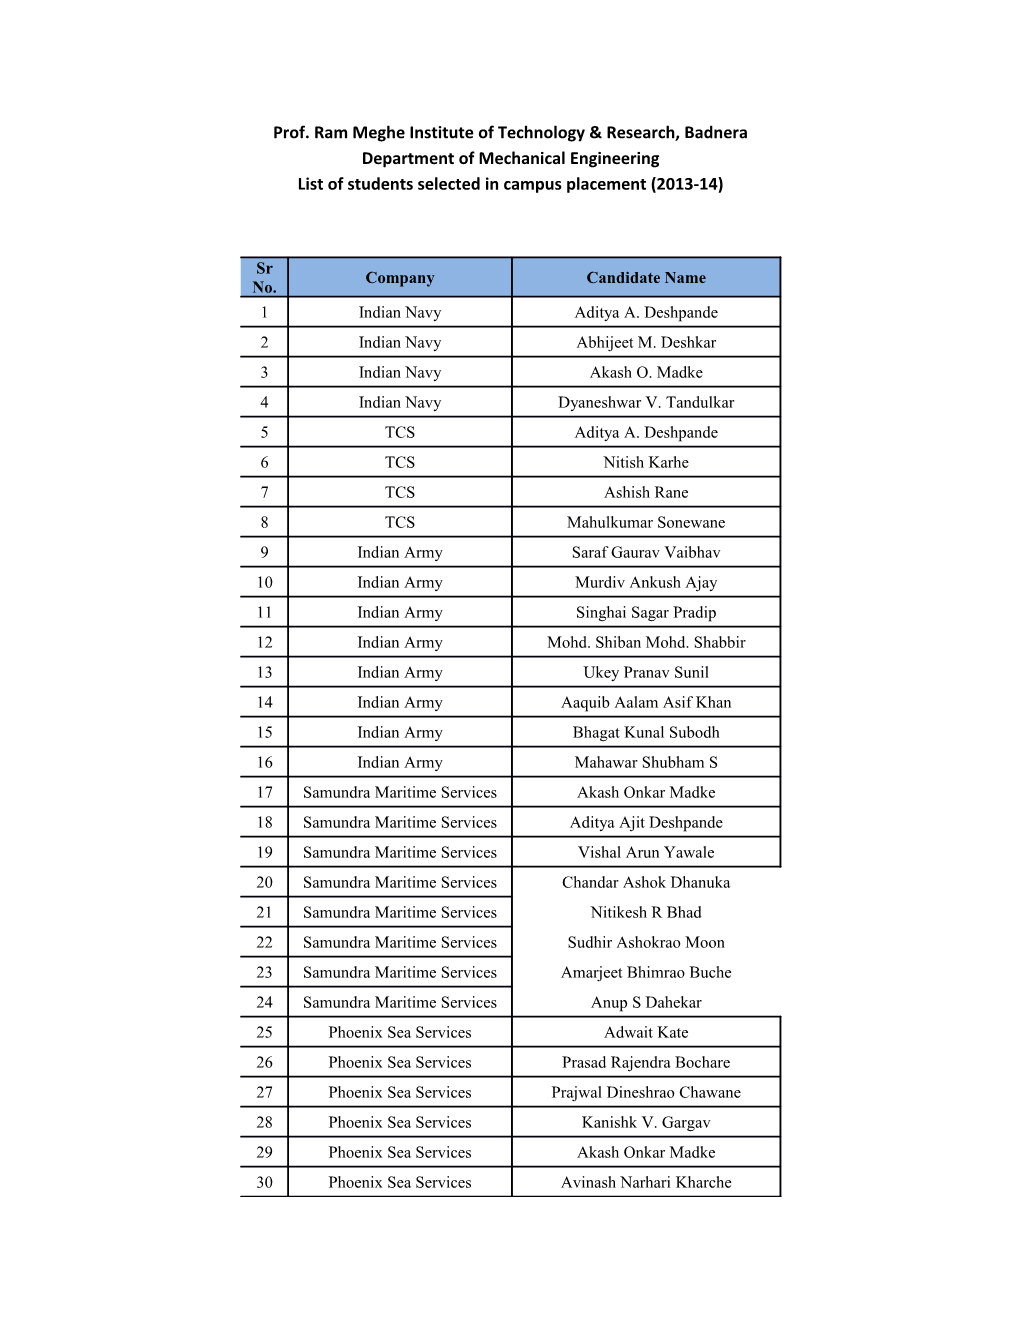 List of Students Selected in Campus Placement (2014-15)